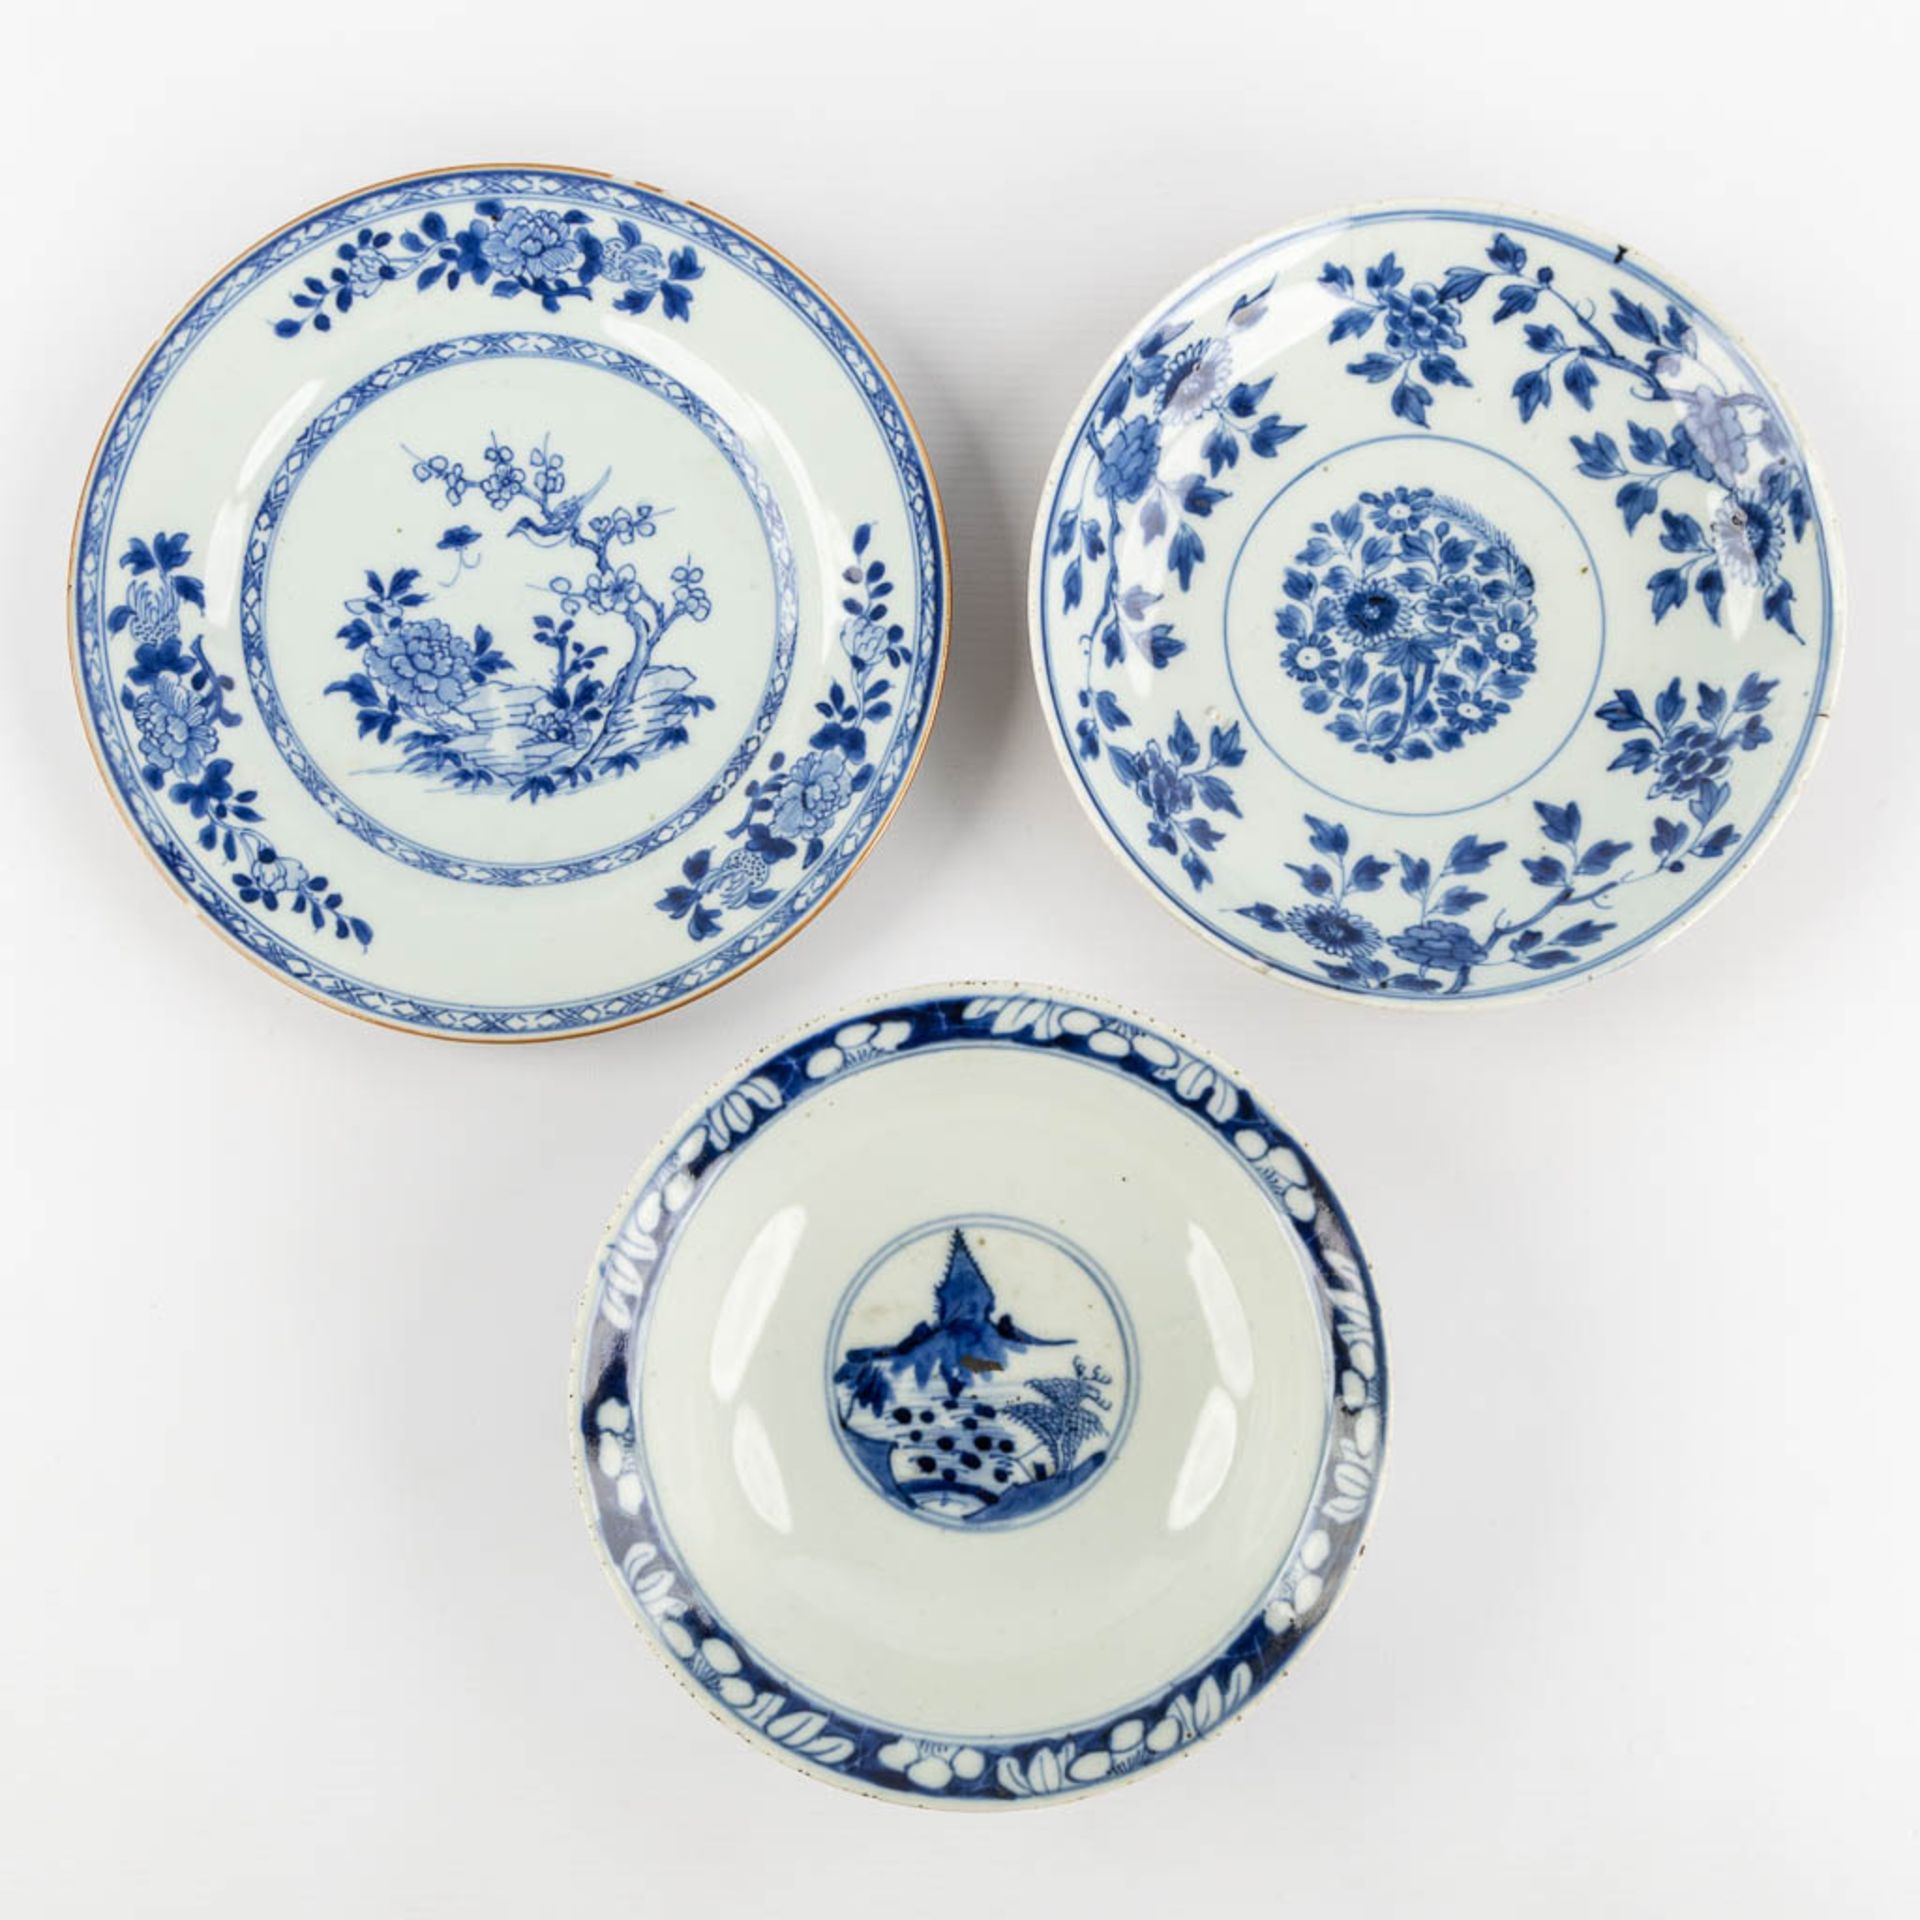 Fifteen Chinese cups, saucers and plates, blue white and Famille Roze. (D:23,4 cm) - Bild 5 aus 15